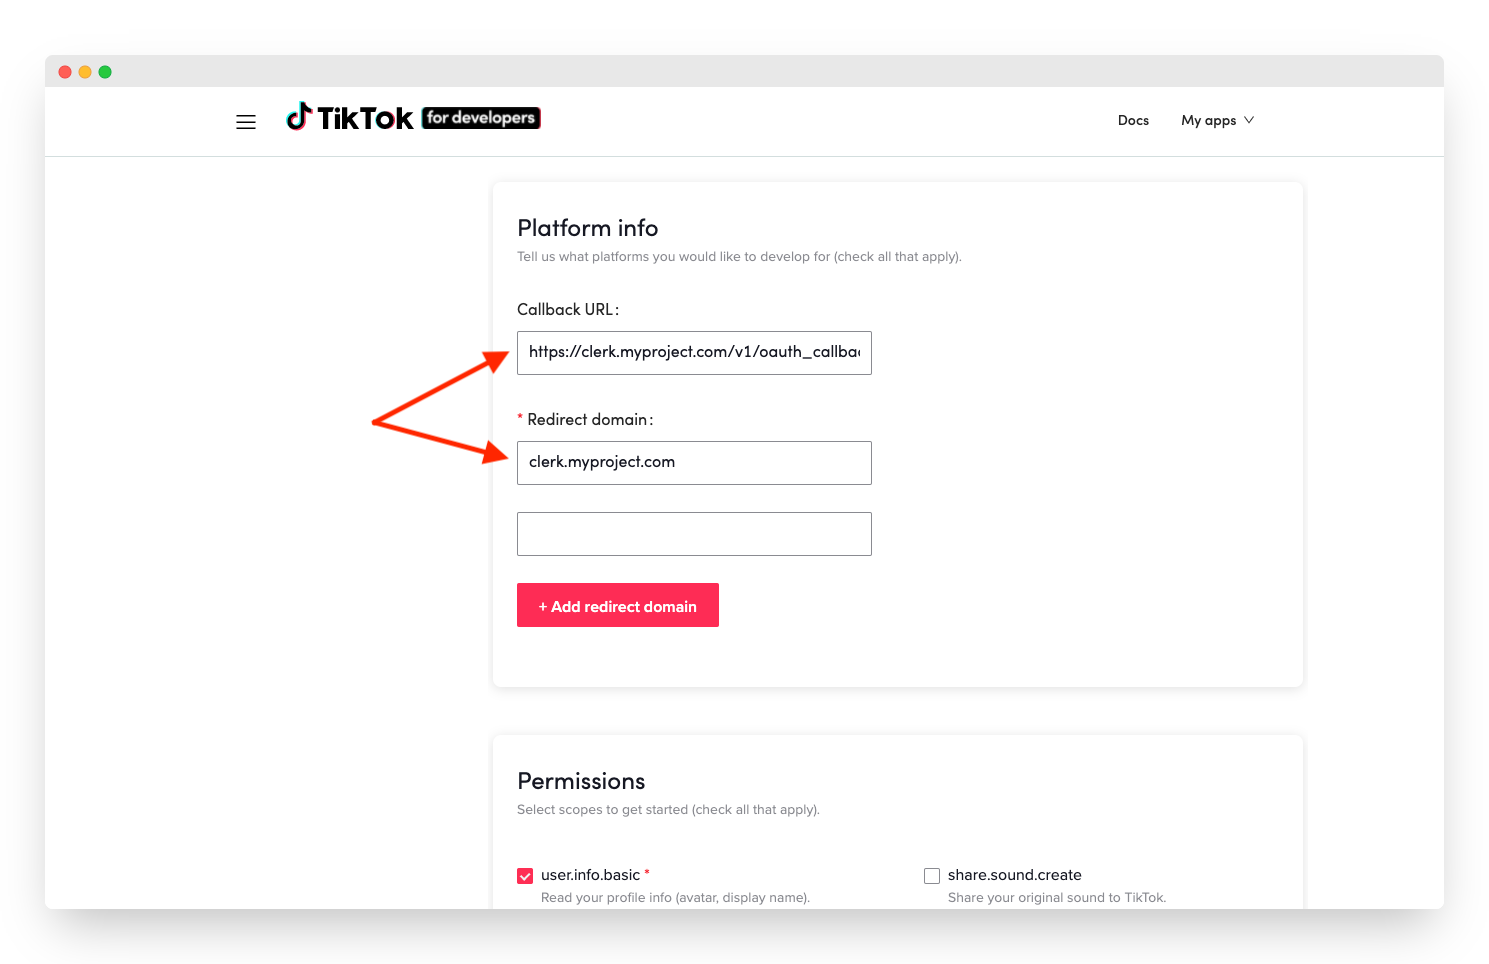 Filling in the Callback URL and Redirect Domain fields